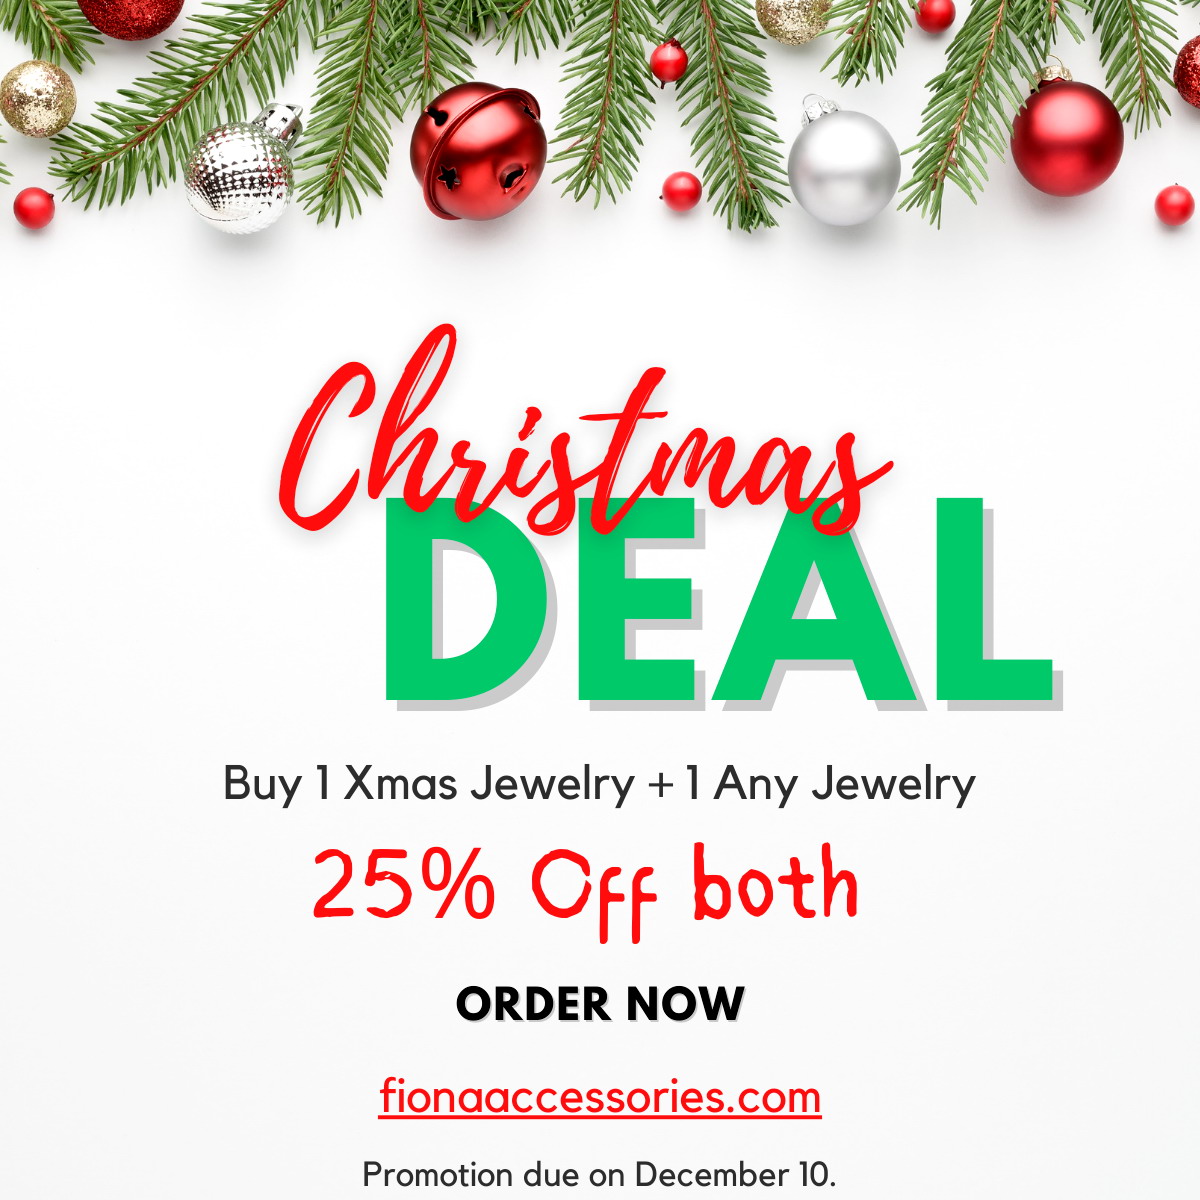 Fionaaccessories.com Xmas Deal: Buy 1 Xmas + 1 ANY Jewelry , Both 25% OFF by December 10.